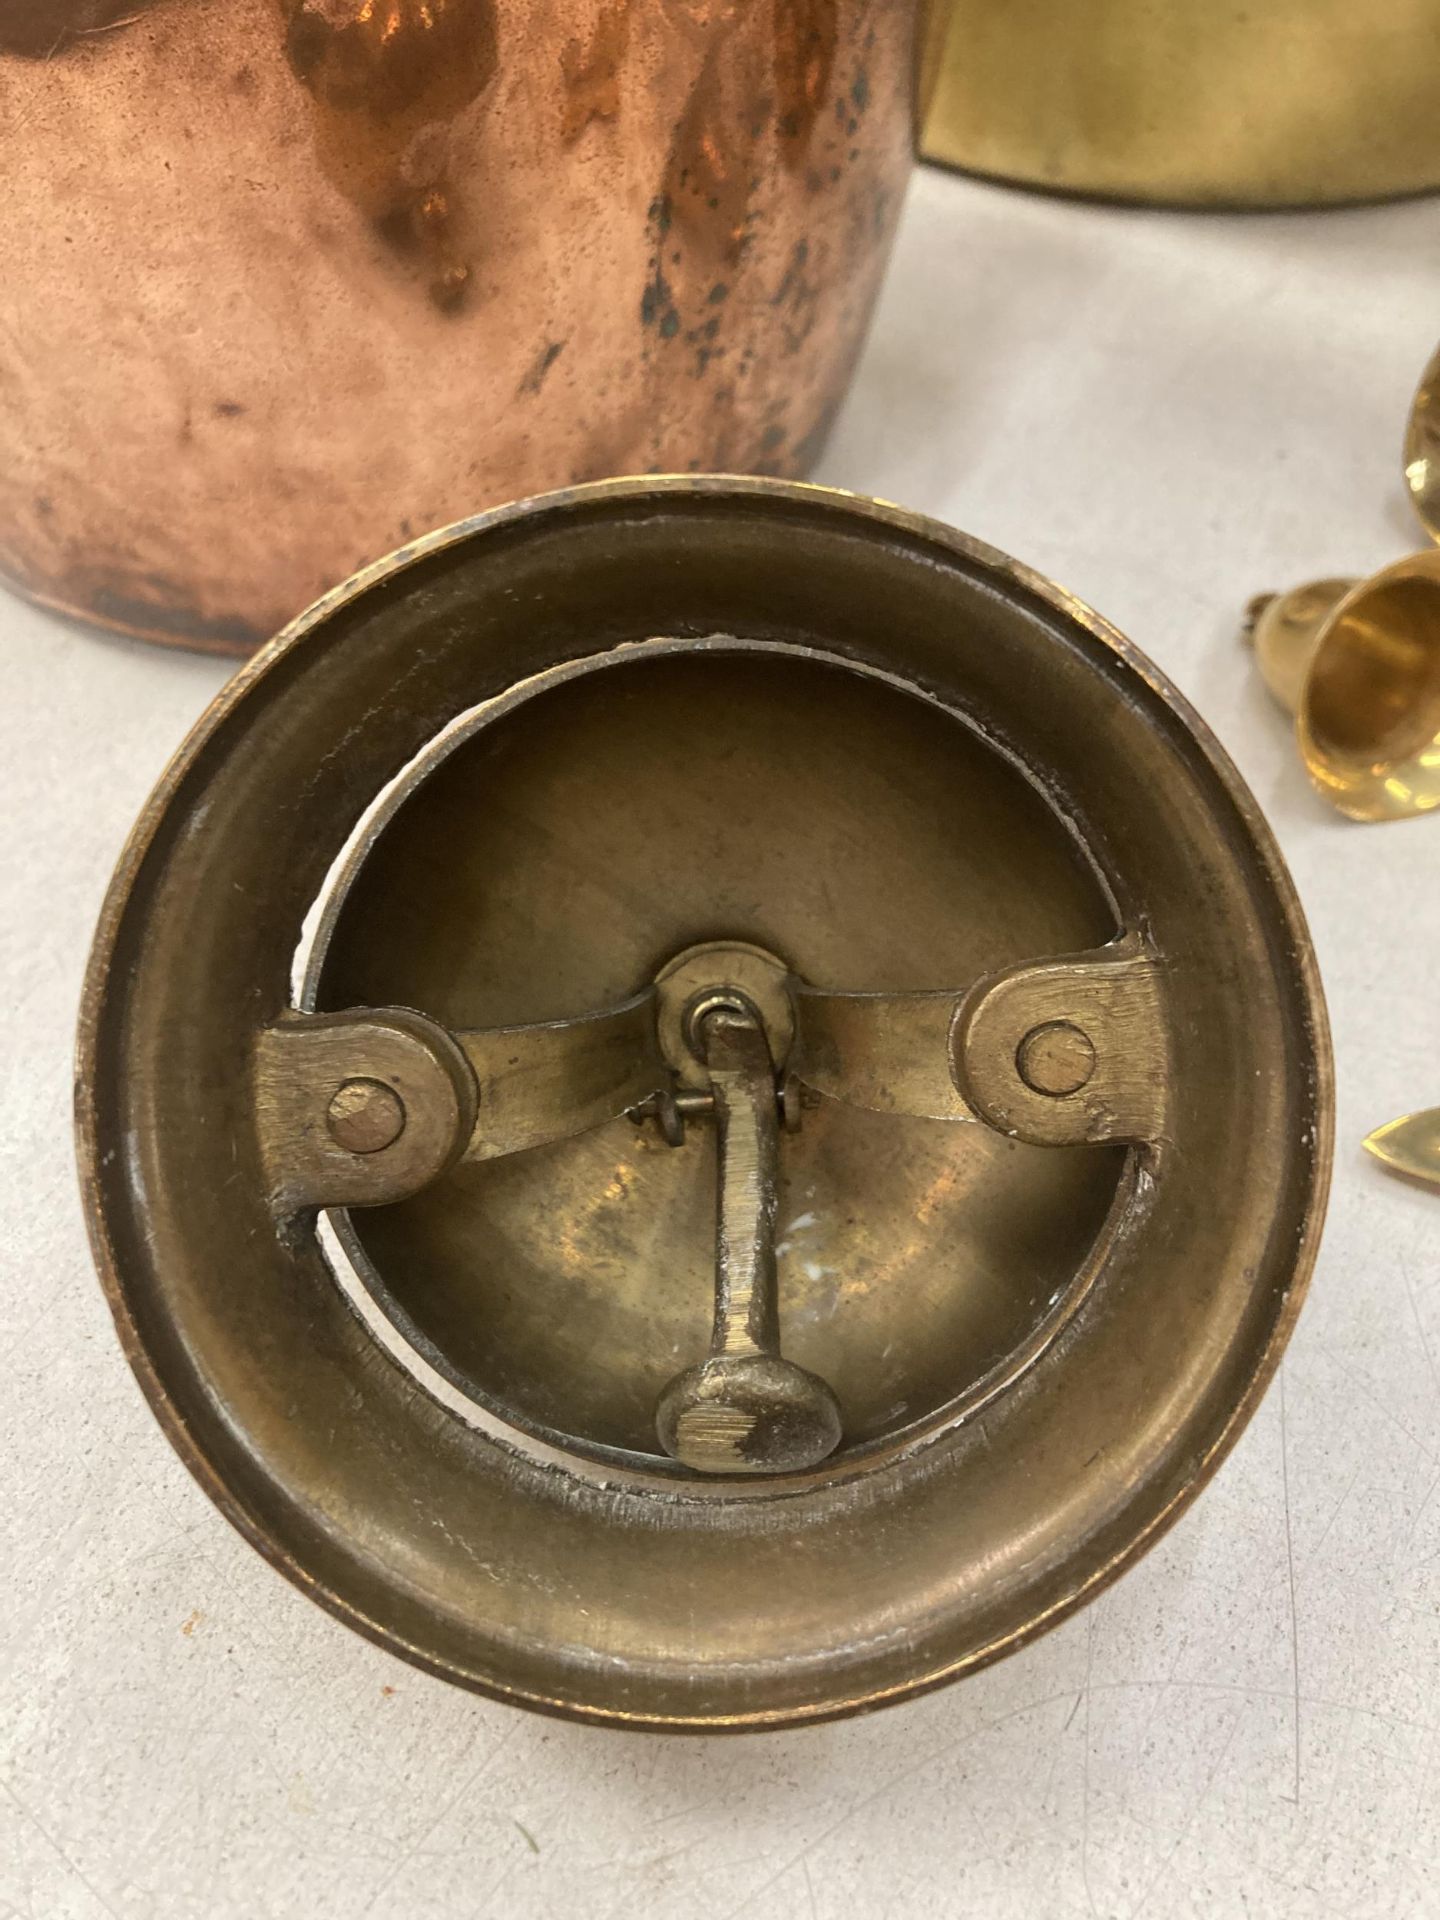 A VINTAGE BRASS HOTEL / RECEPTION BELL - Image 3 of 3